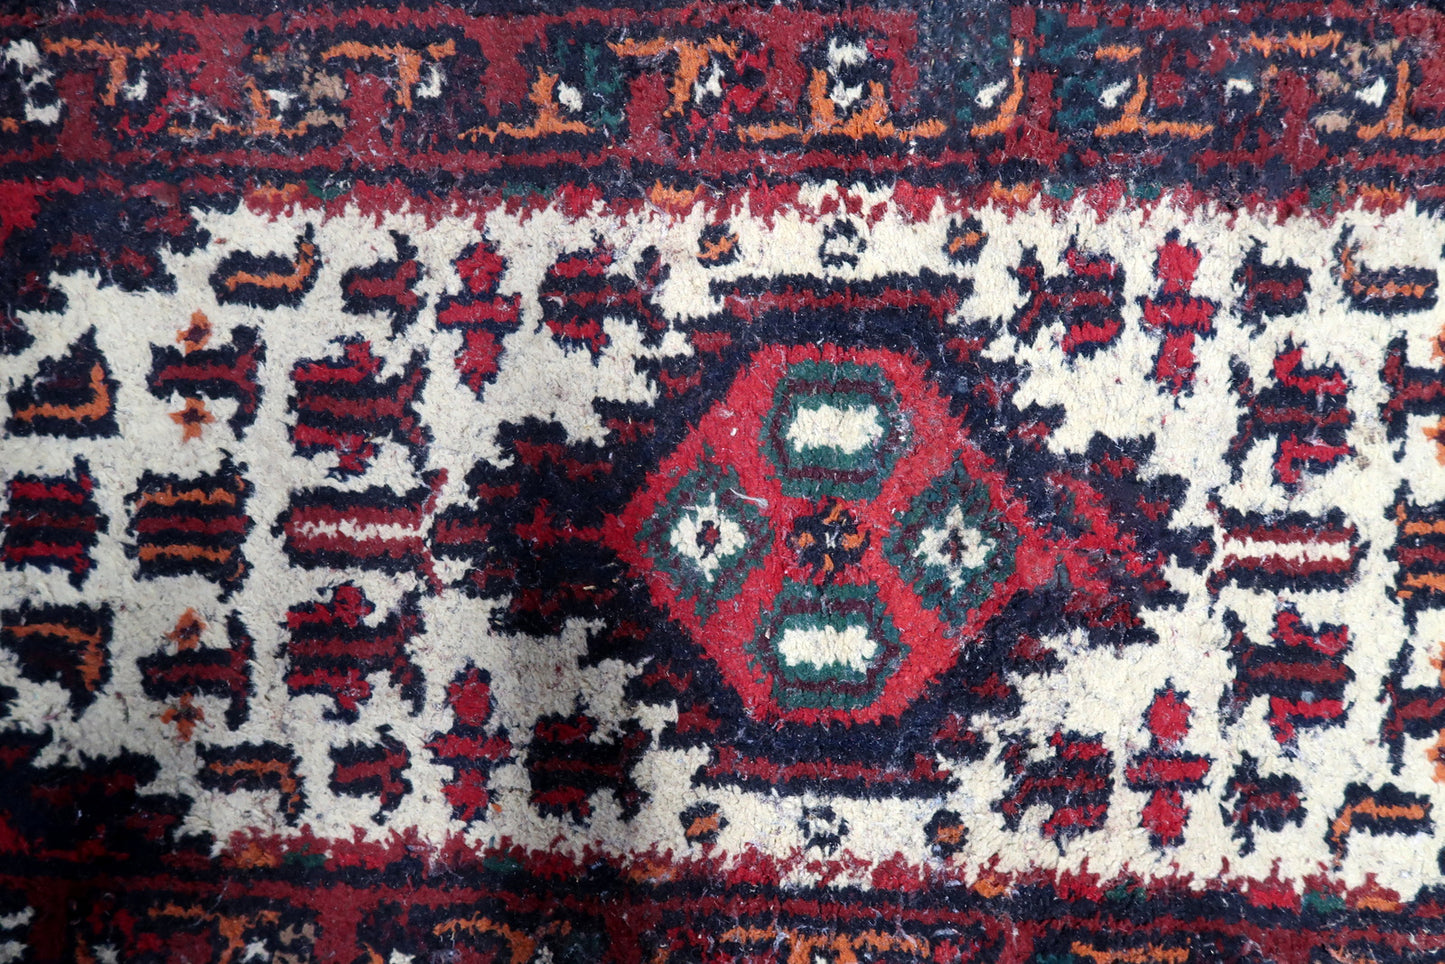 Back View of Exquisite Vintage Persian-Style Rug